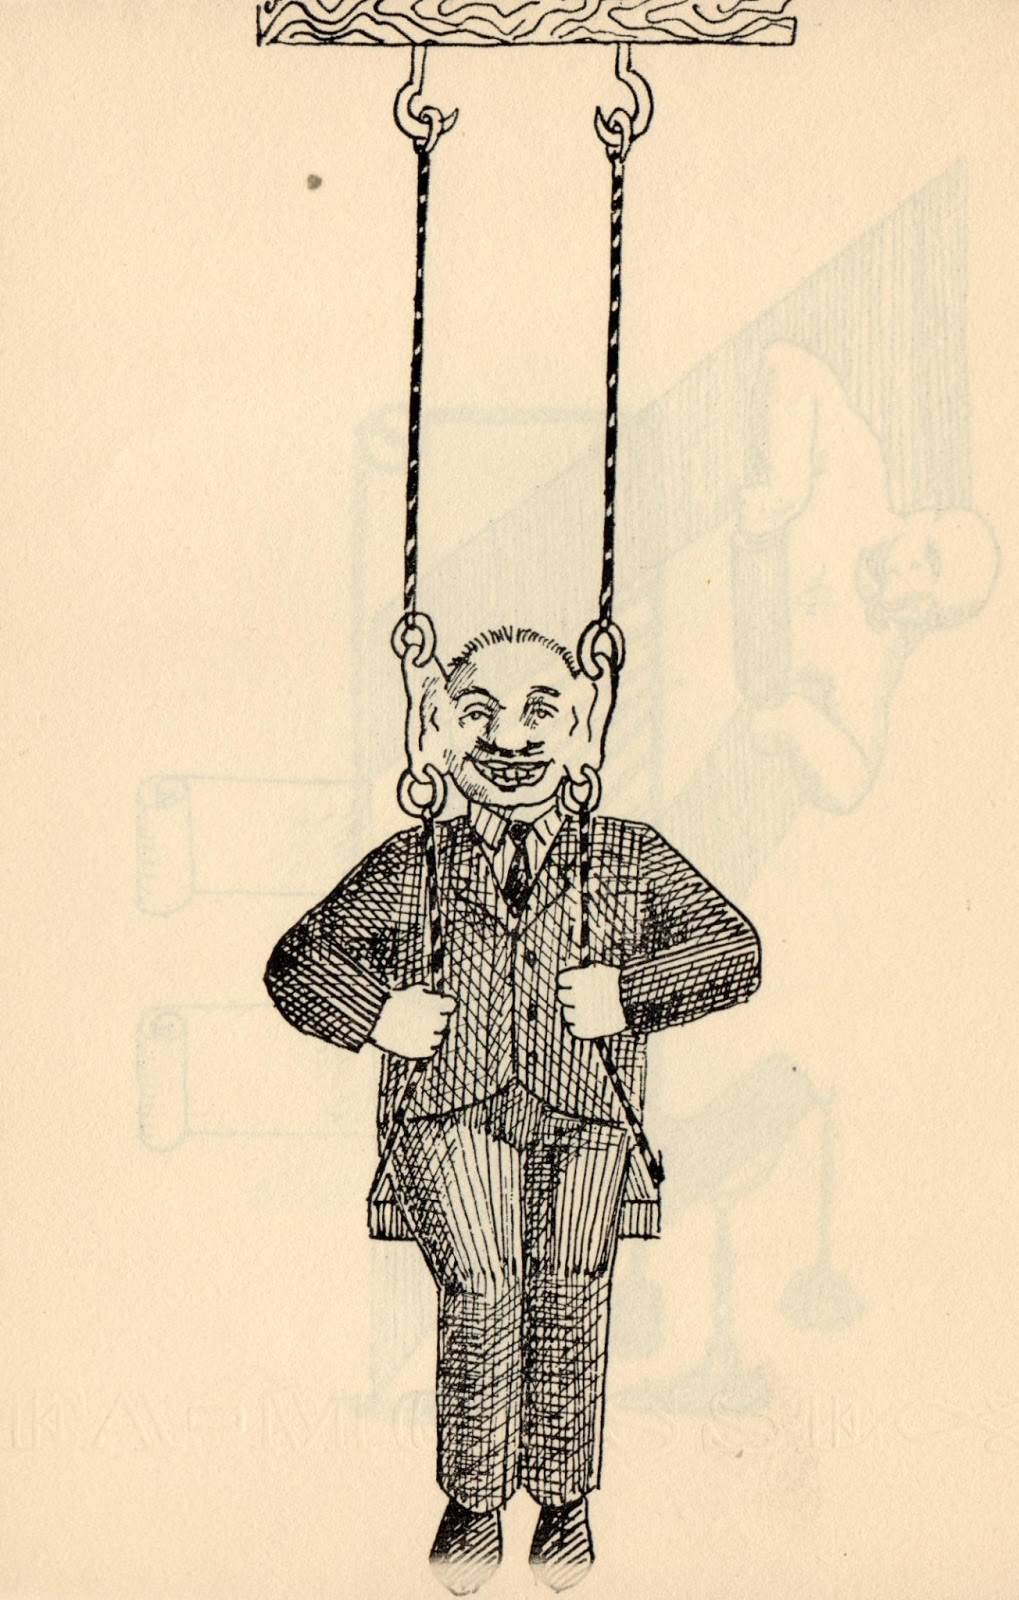 Exploring the Depths of Pain: Roland Topor's 1960 Illustration of Masochism